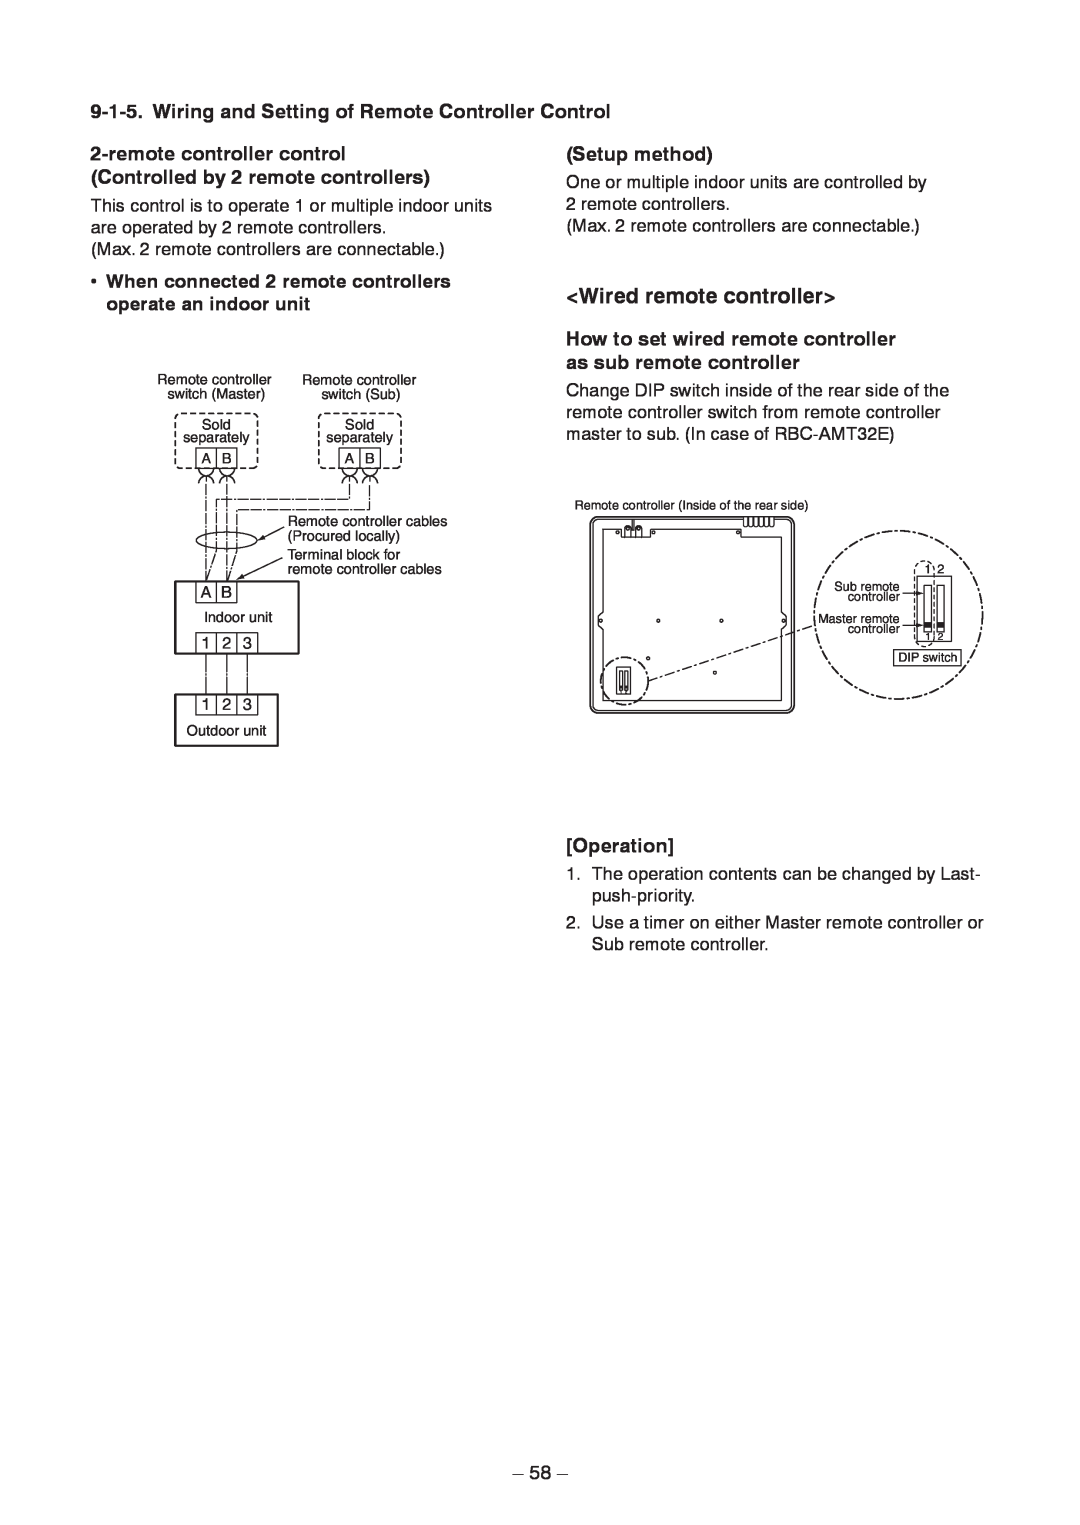 Toshiba RAV-SM2242DT-TR, RAV-SM2802DT-E, RAV-SM2802DT-TR service manual <Wired remote controller>, Setup method, Operation 